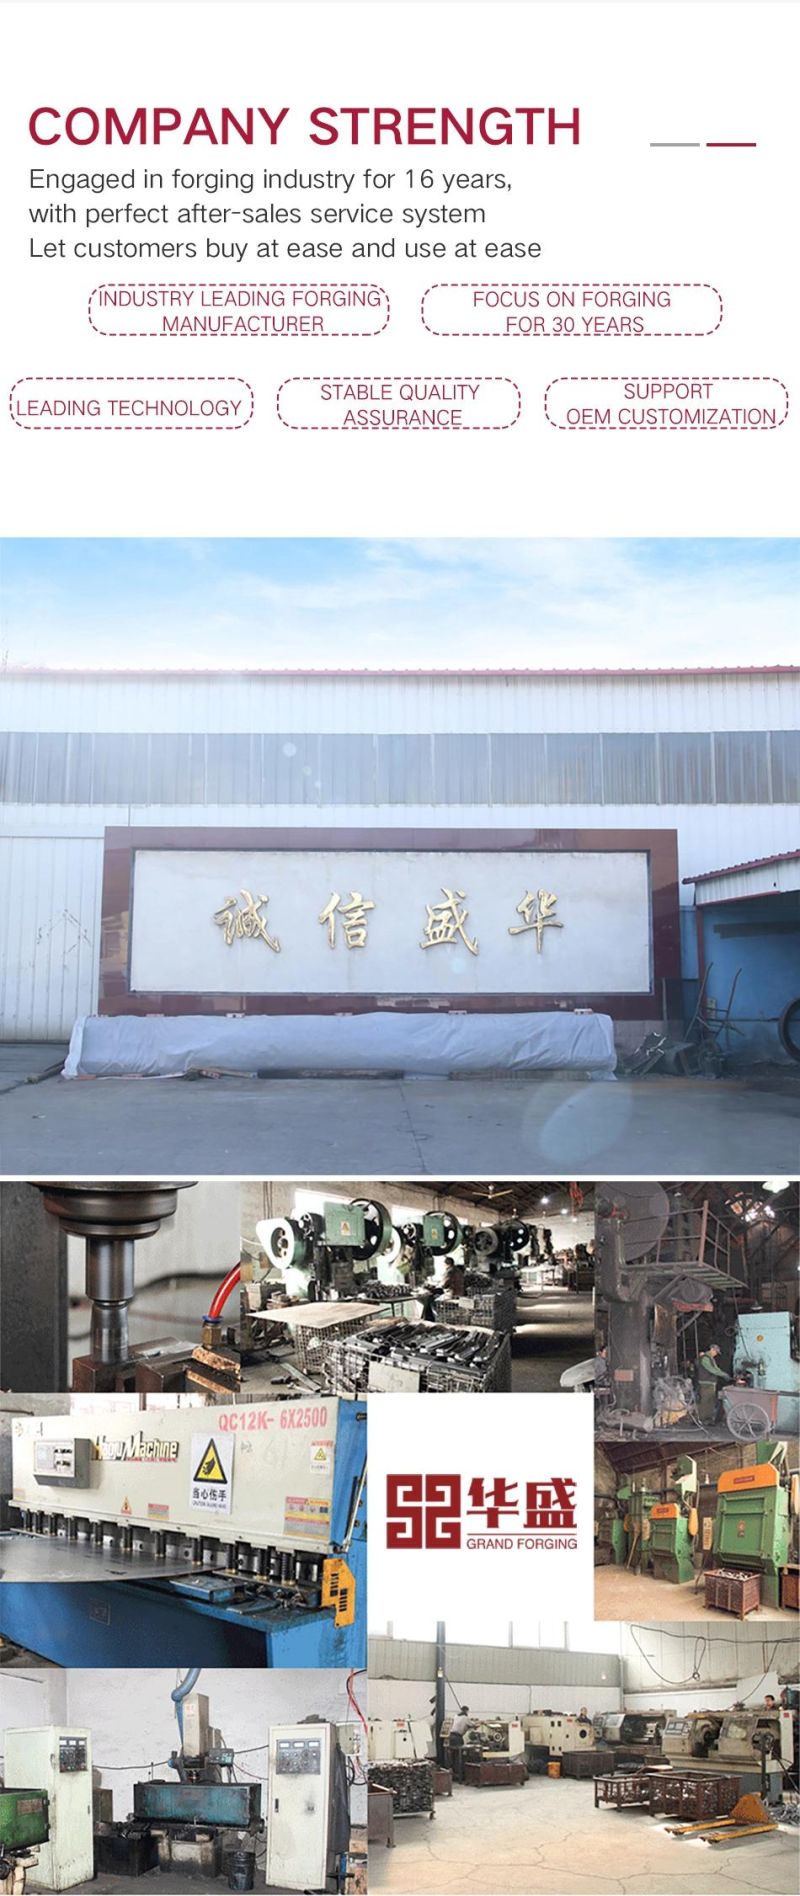 China Factory Forging Special-Shaped Parts Auto Parts